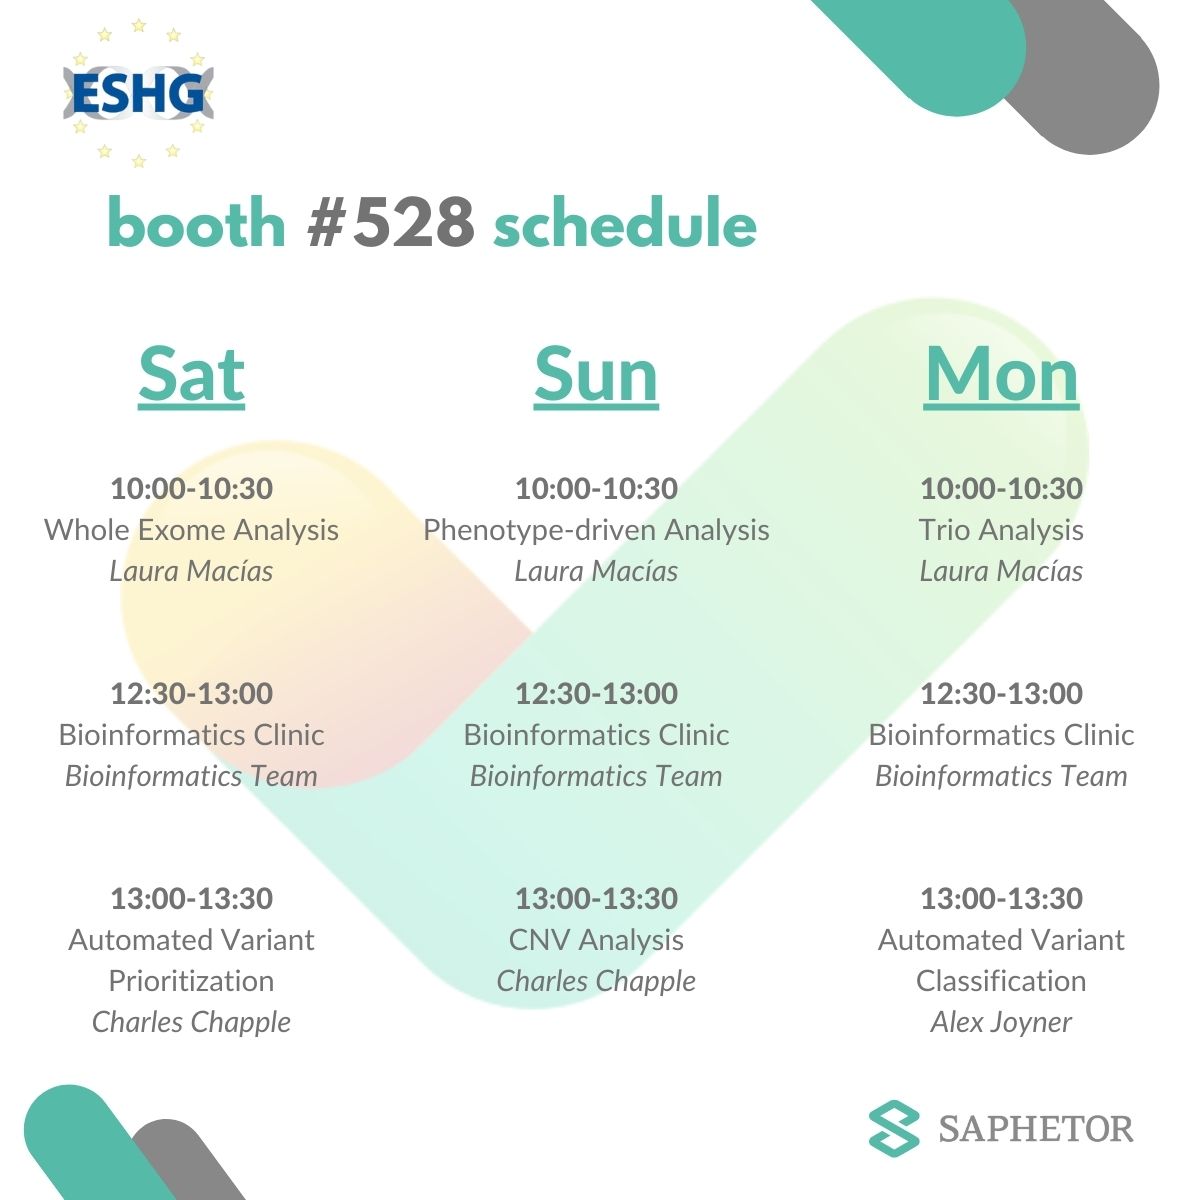 #ESHG is finally here! 📅 We've got a packed schedule for booth #528 📅 Drop by to say hello, grab some chocolates, and talk #NGS analysis.